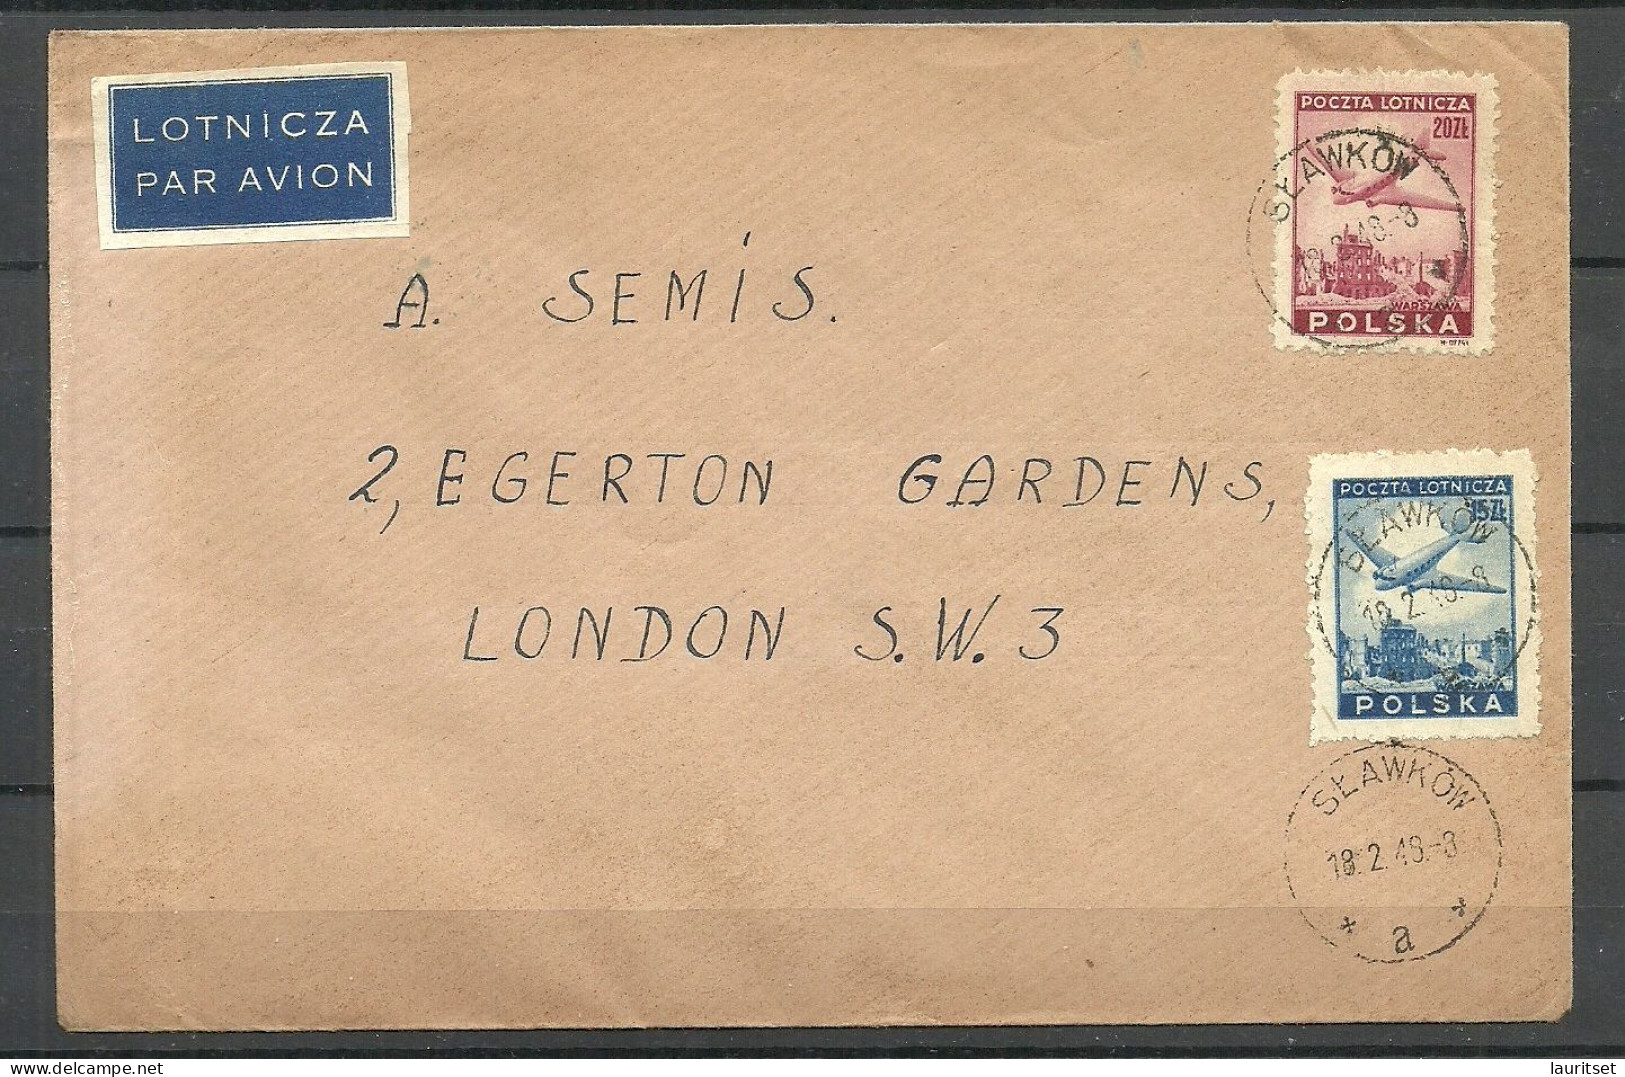 POLEN Poland 1948 Air Mail Cover O SLAWKOW To London Great Britain - Aviones